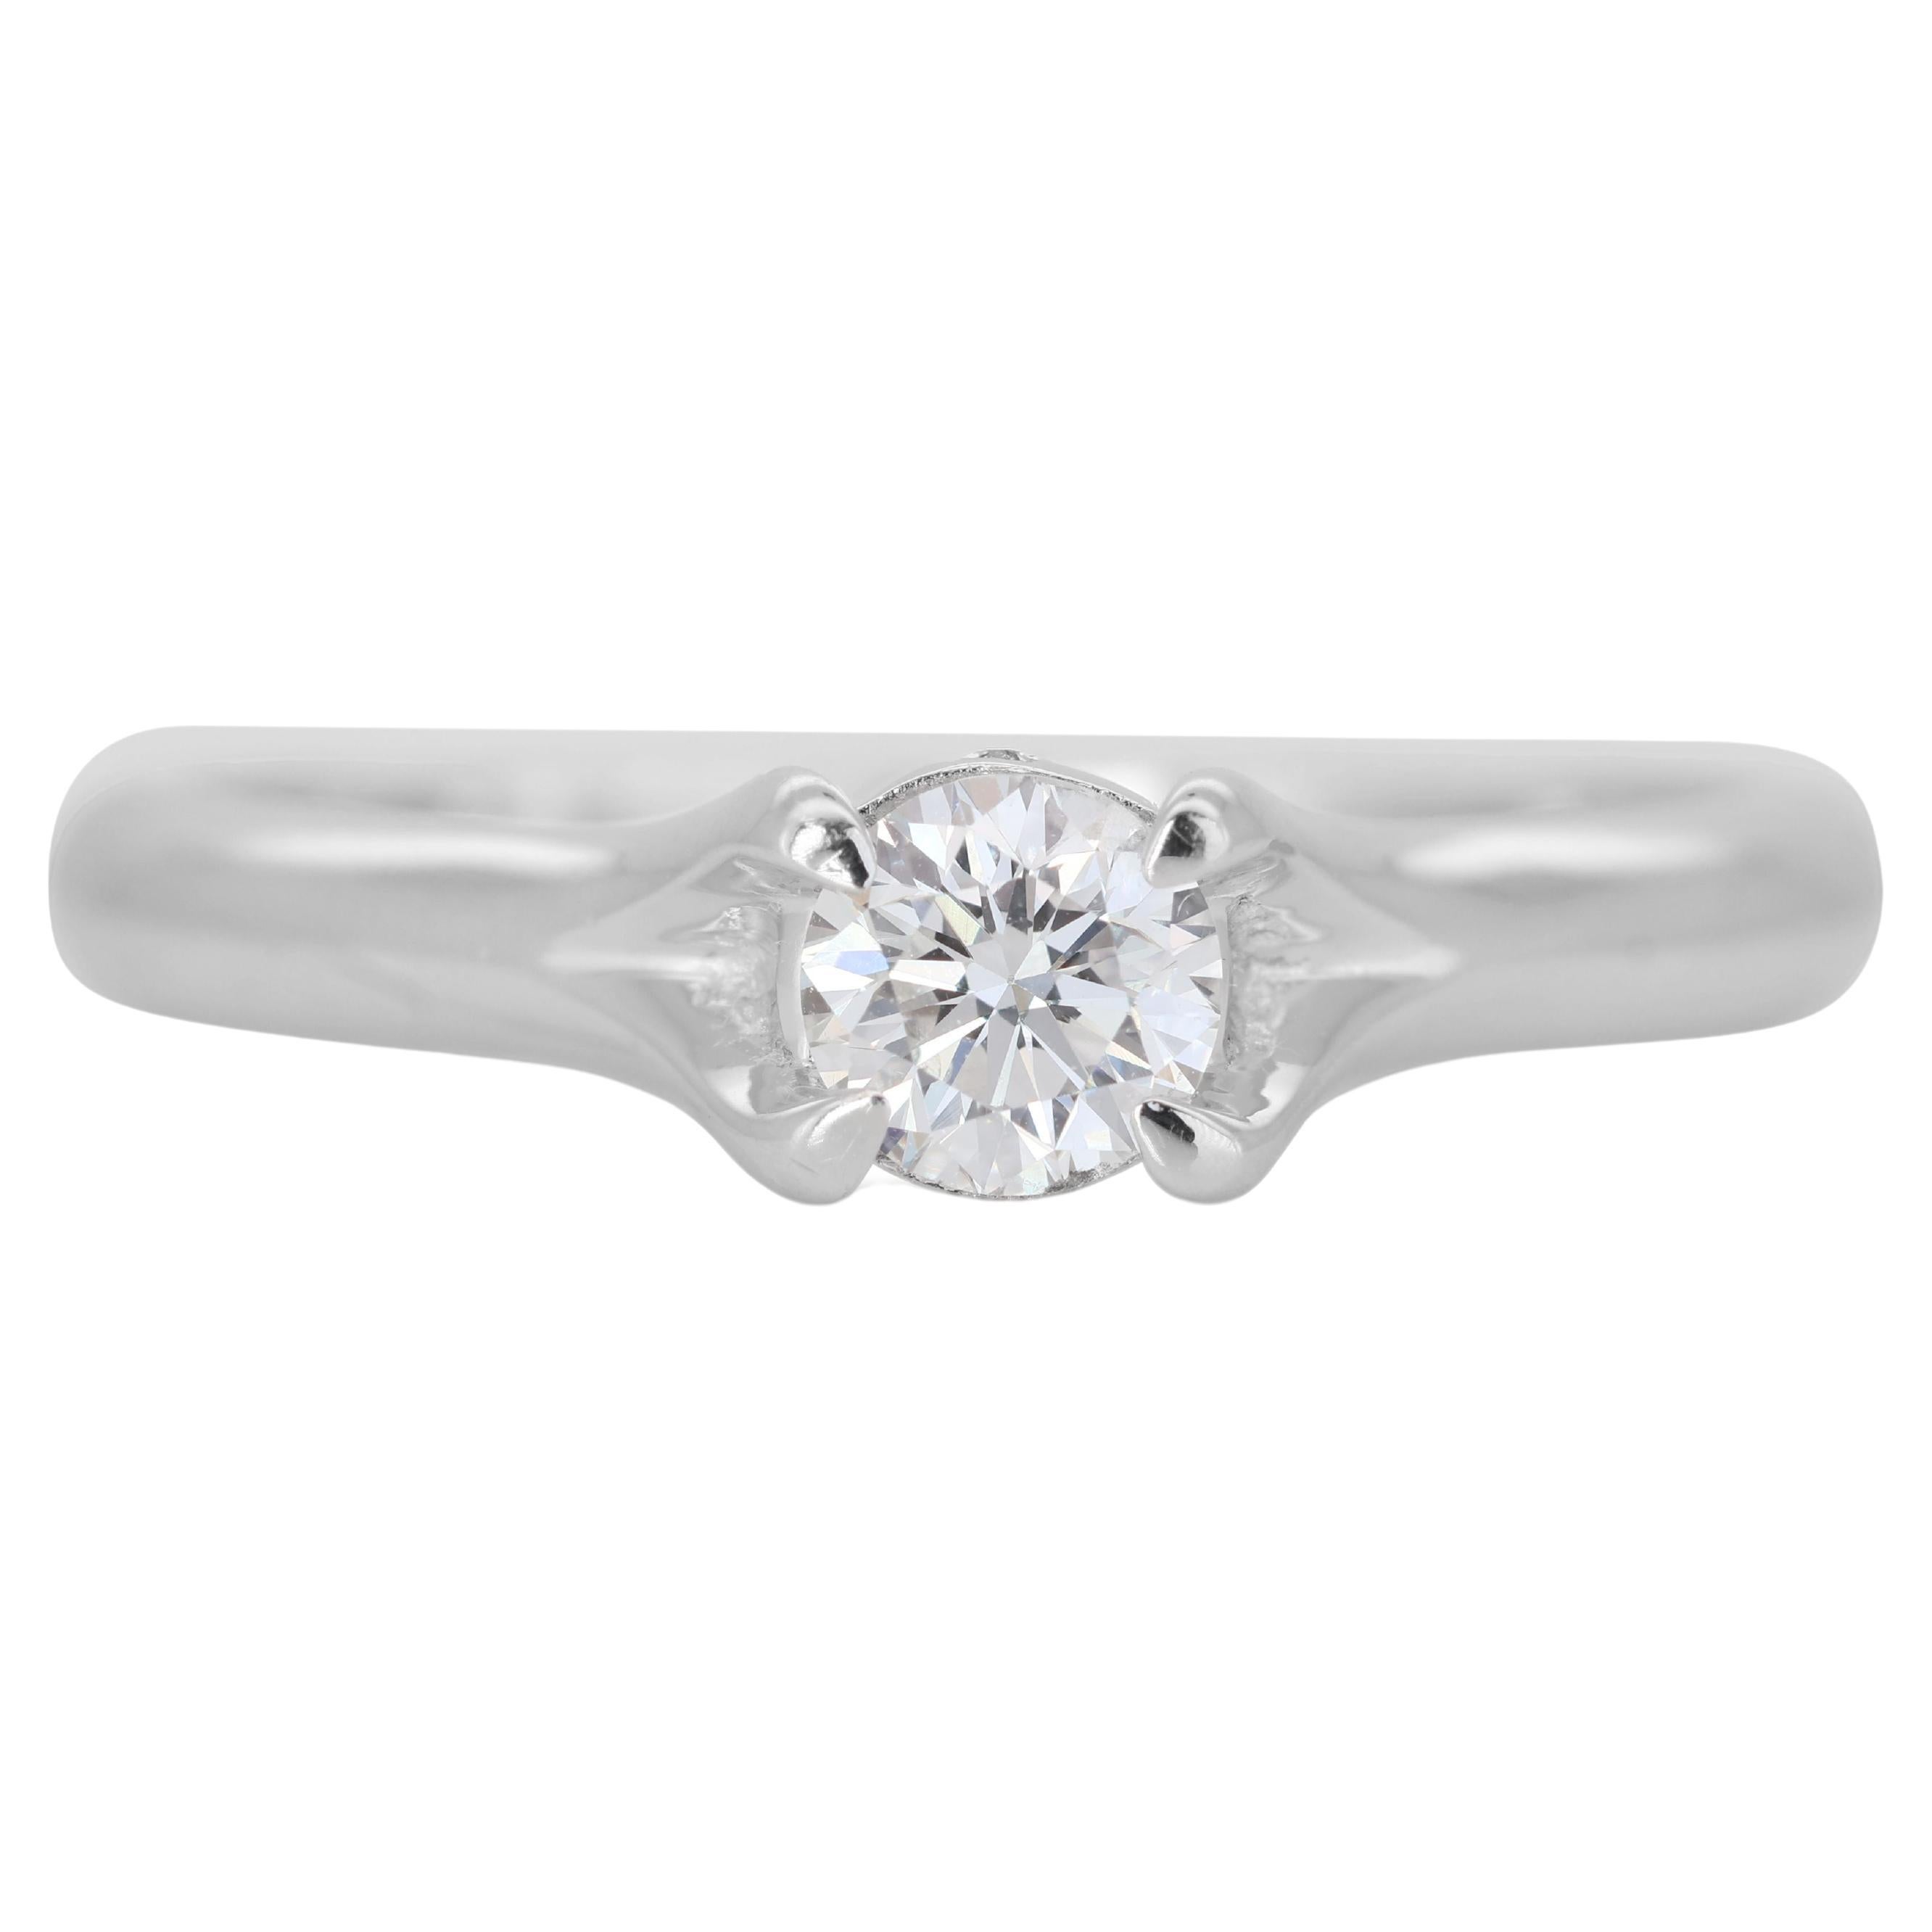 Classic 14K White Gold Solitaire Ring with 0.35ct Natural DiamondsDianoche Pte L